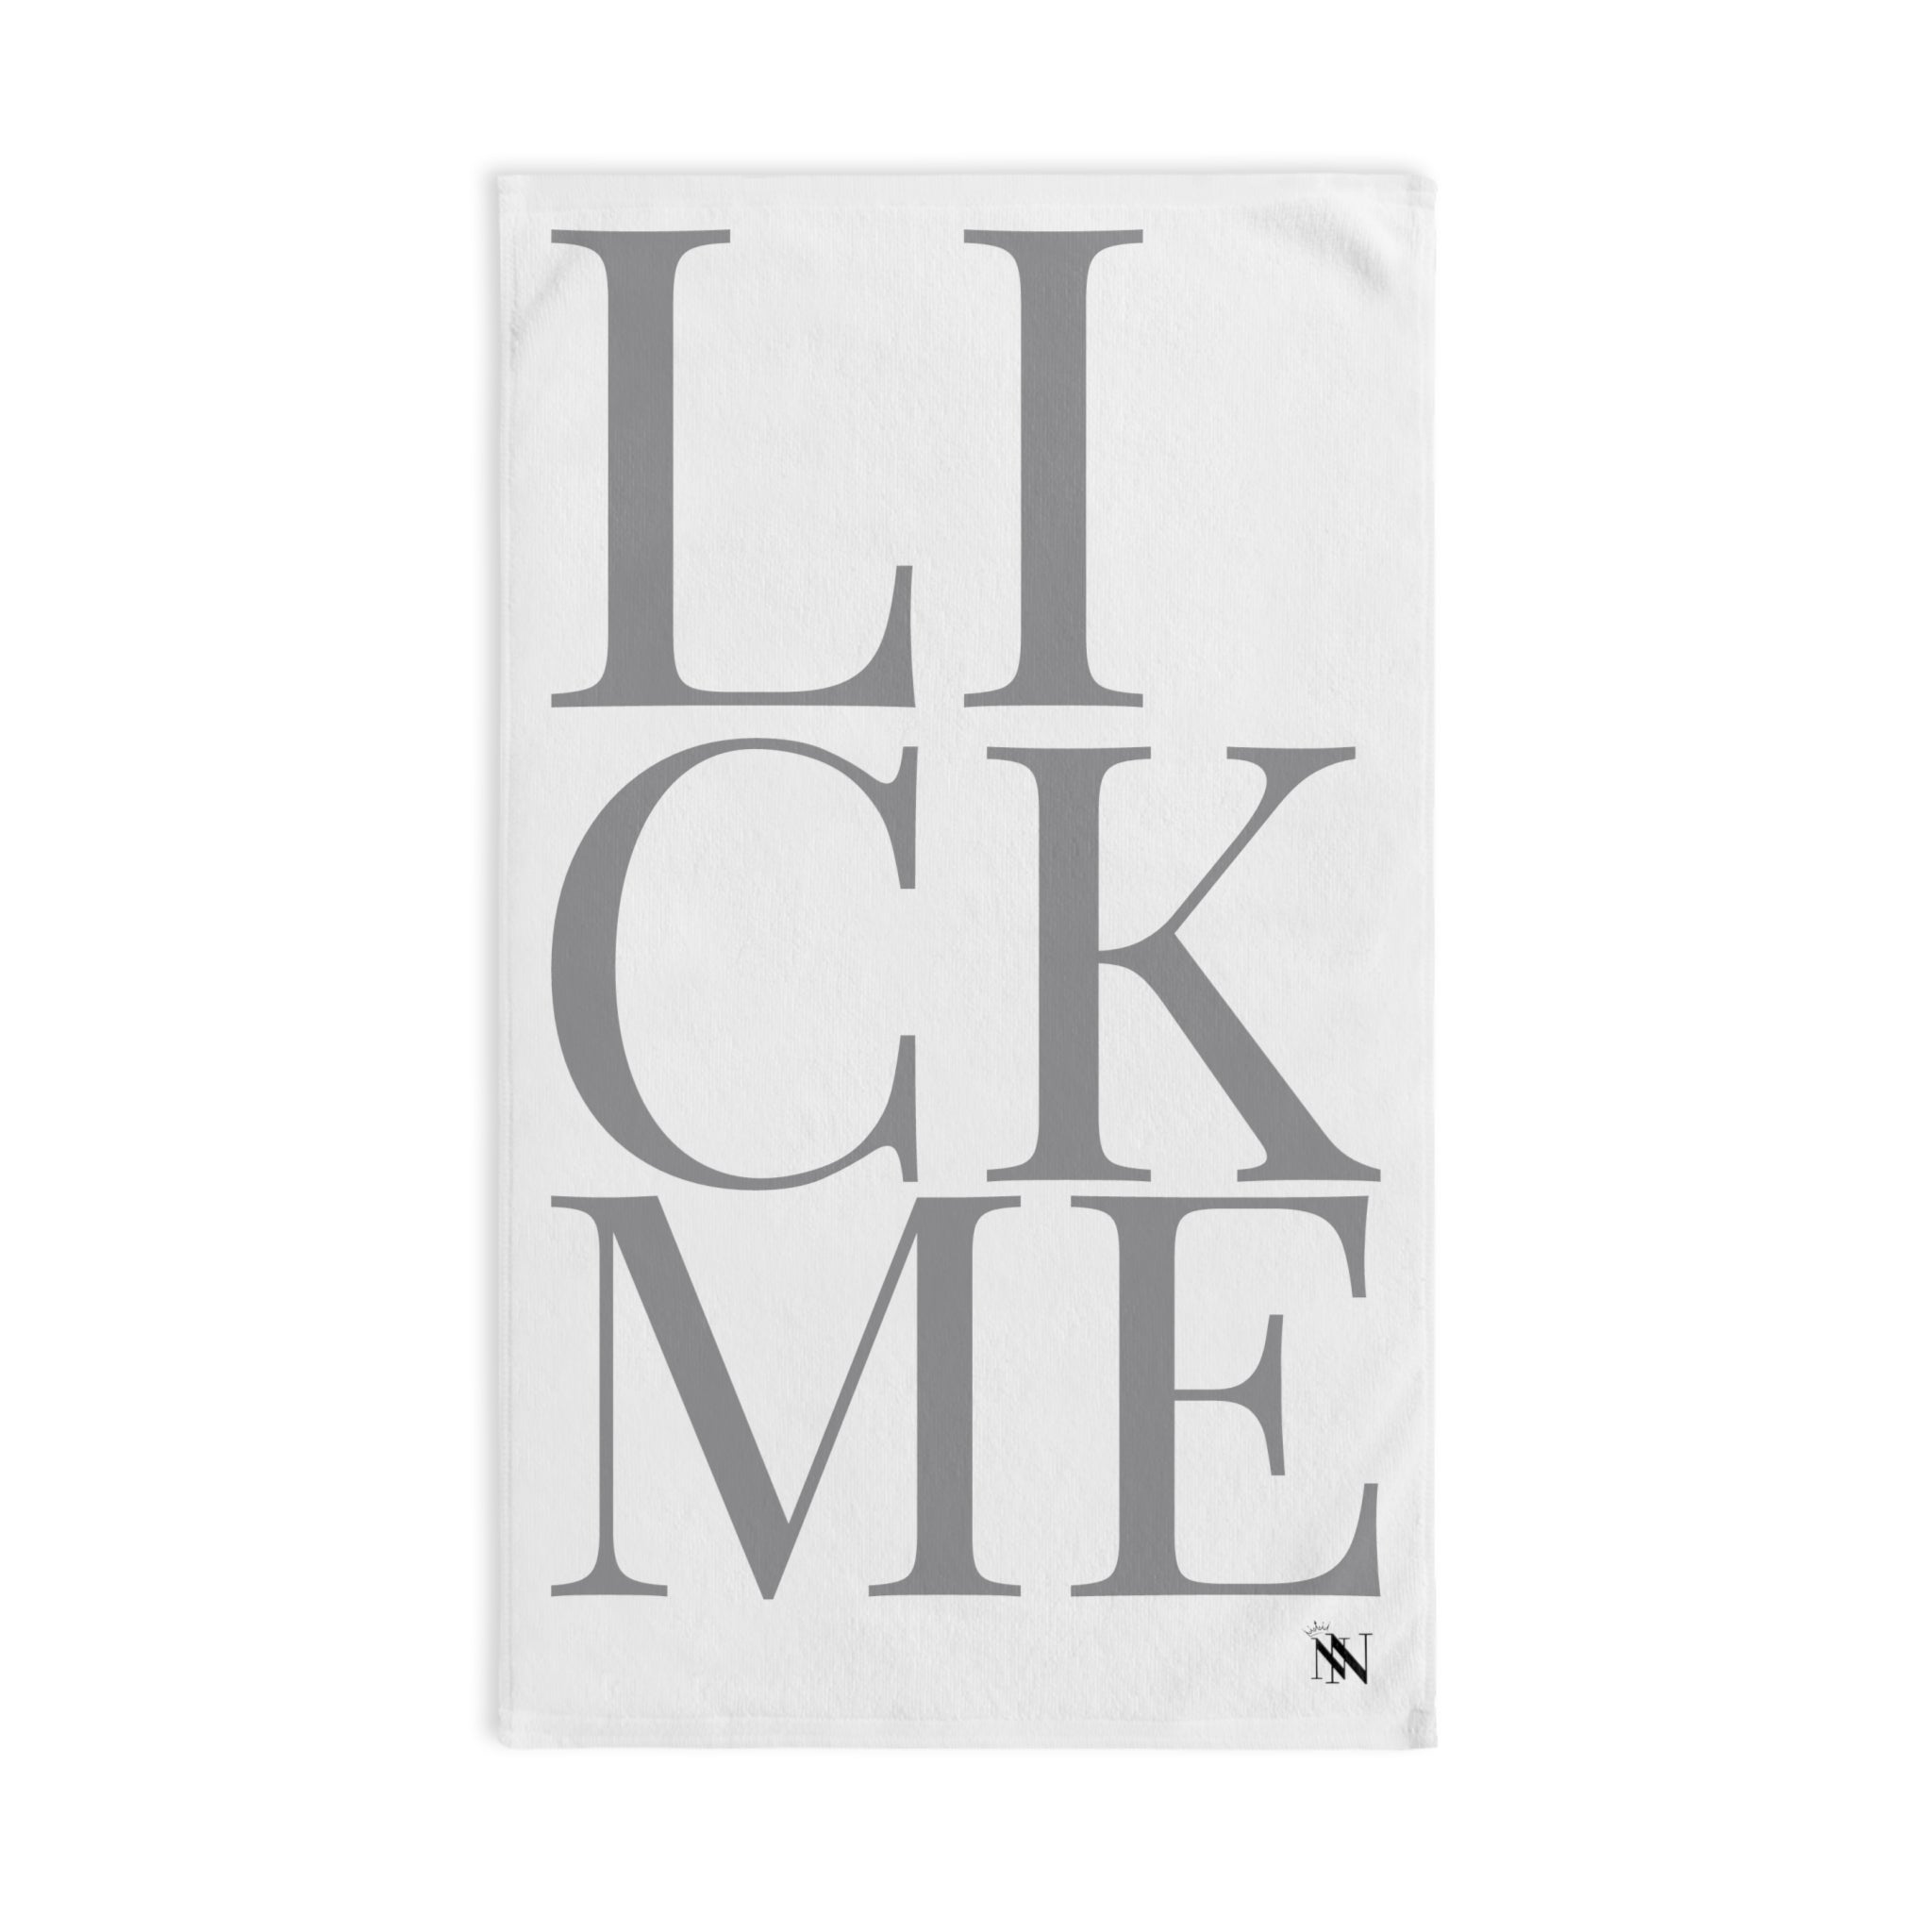 Lick Me GreyWhite | Funny Gifts for Men - Gifts for Him - Birthday Gifts for Men, Him, Her, Husband, Boyfriend, Girlfriend, New Couple Gifts, Fathers & Valentines Day Gifts, Christmas Gifts NECTAR NAPKINS